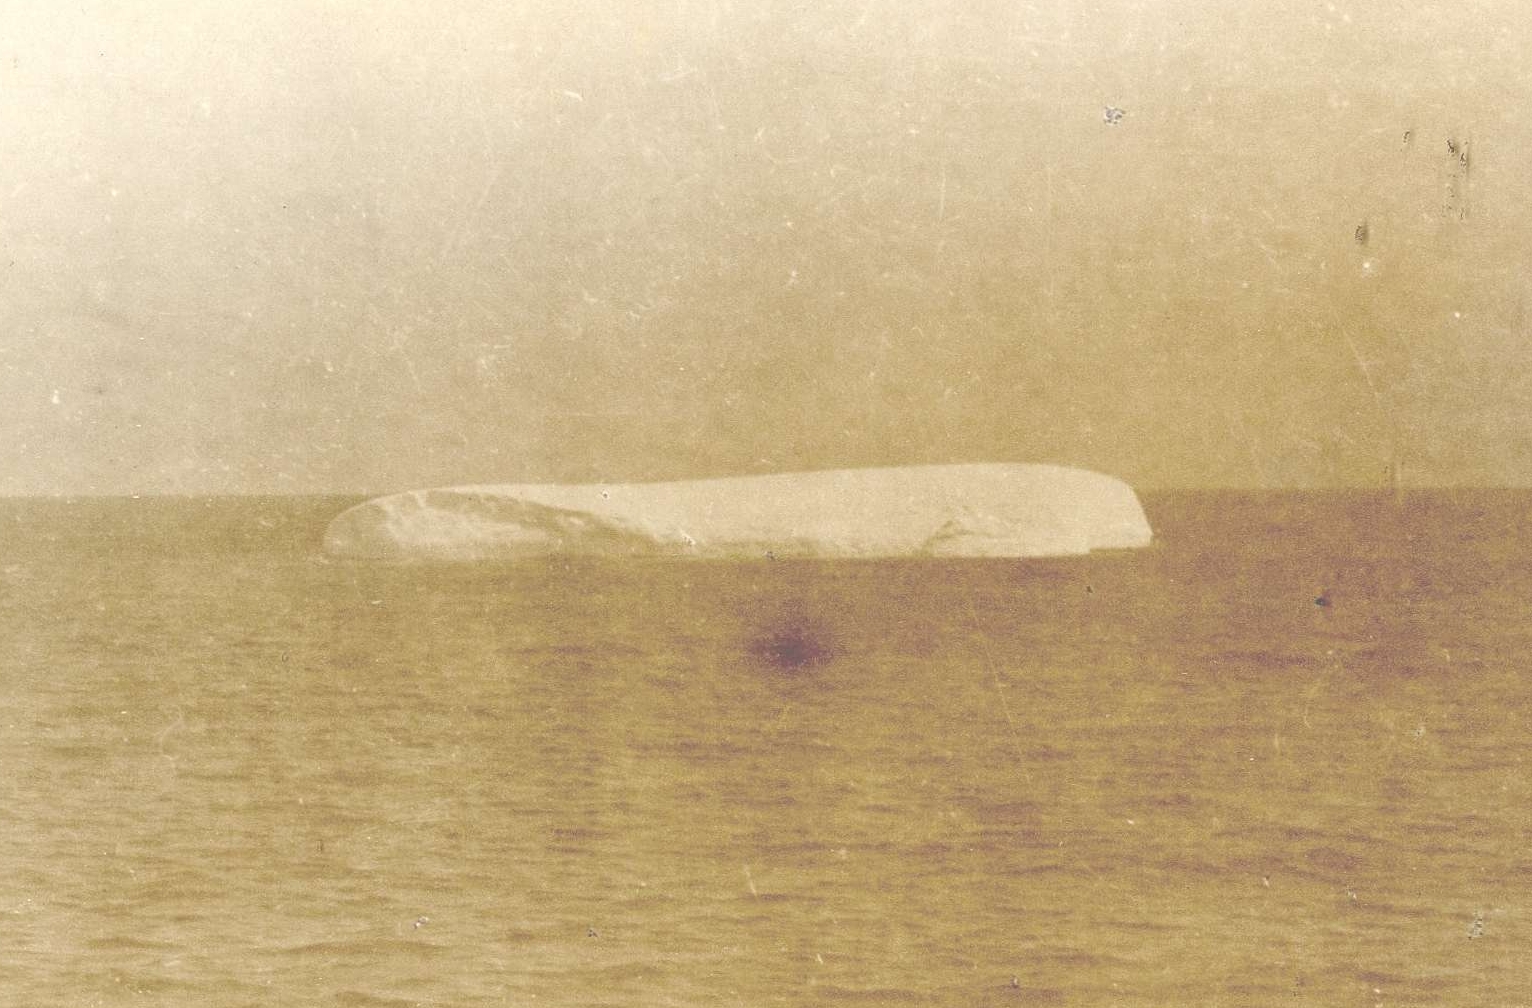 A Photograph of an Iceberg Floating Near the Site of the Titanic Sinking